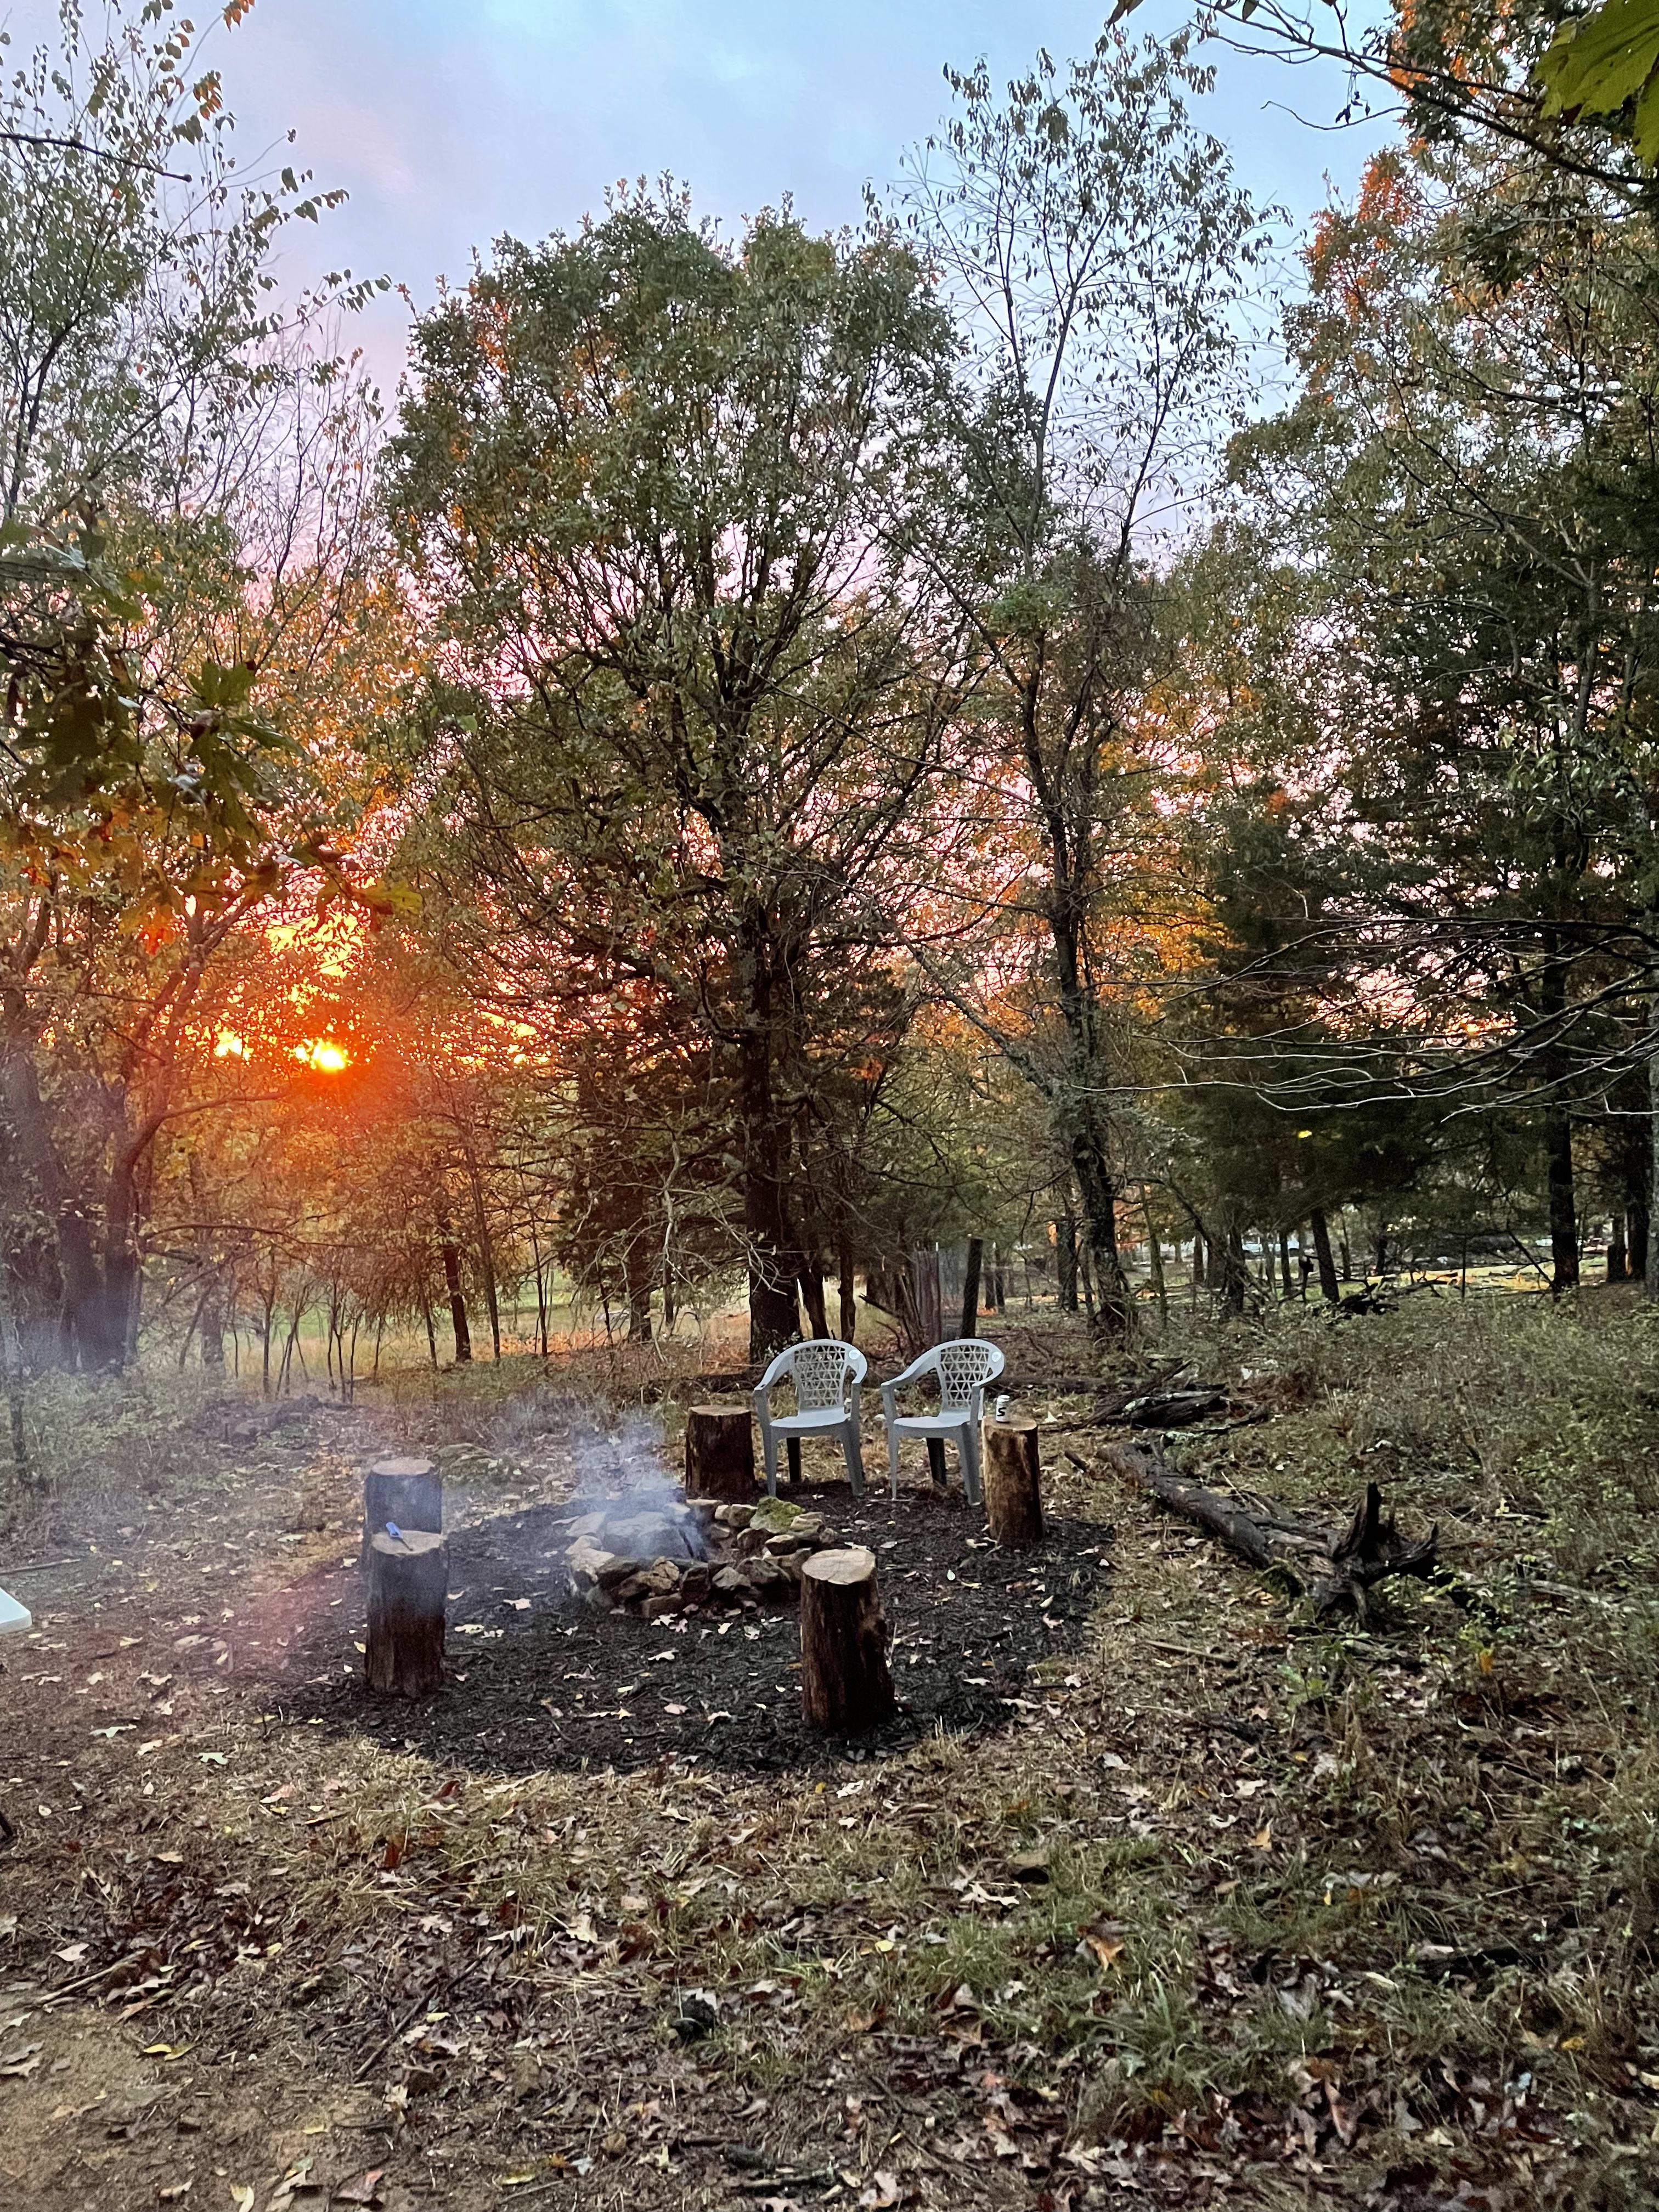 Sunset beyond the campfire area